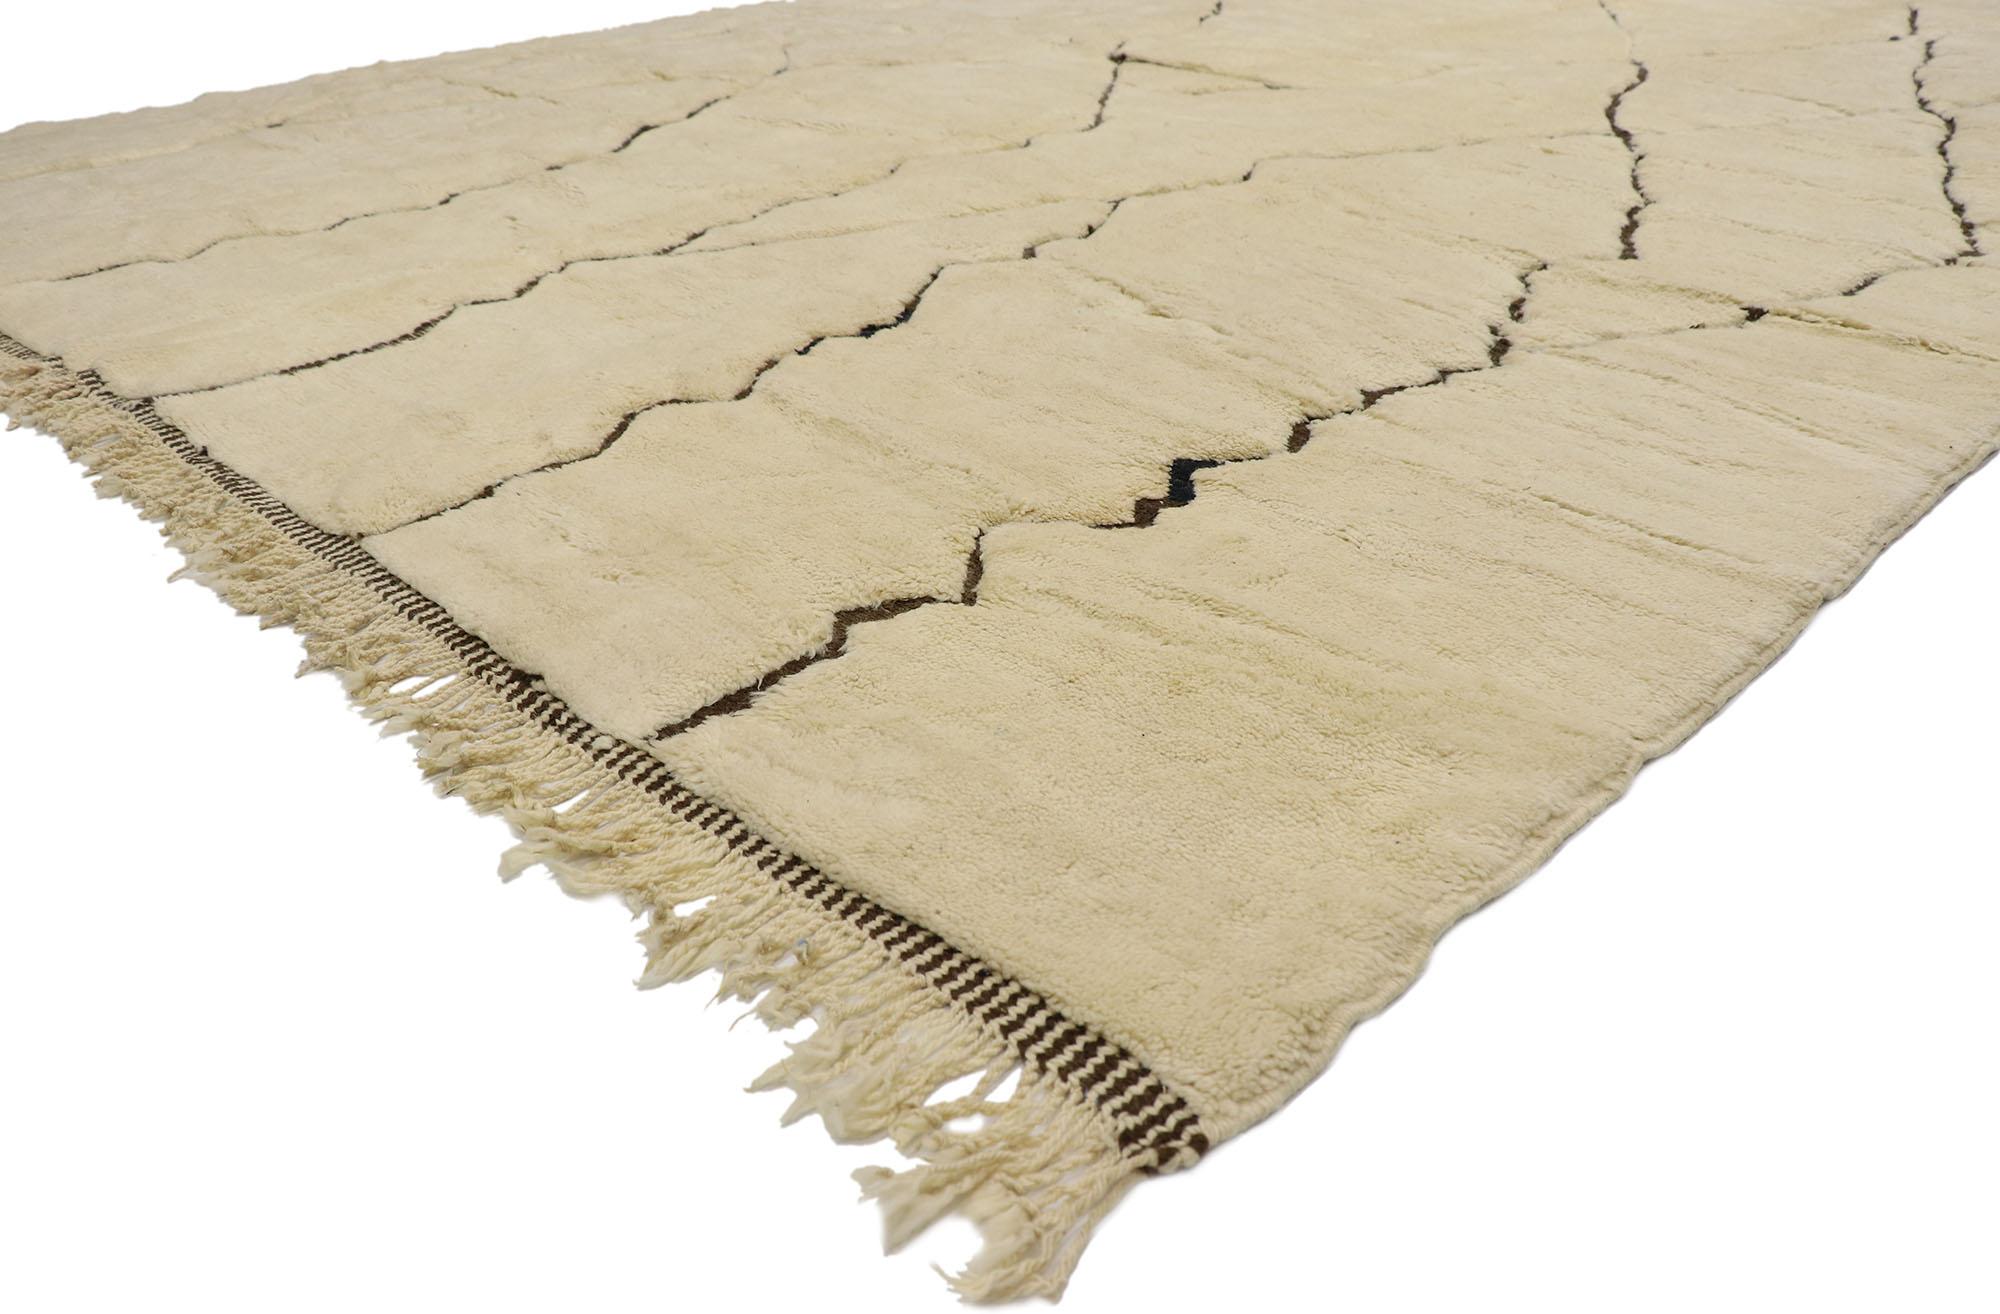 21644, new Contemporary Berber Moroccan rug with Mid-Century Modern style. With its simplicity, plush pile and Hygge vibes, this hand knotted wool contemporary Berber Moroccan rug provides a feeling of cozy contentment without the clutter. It